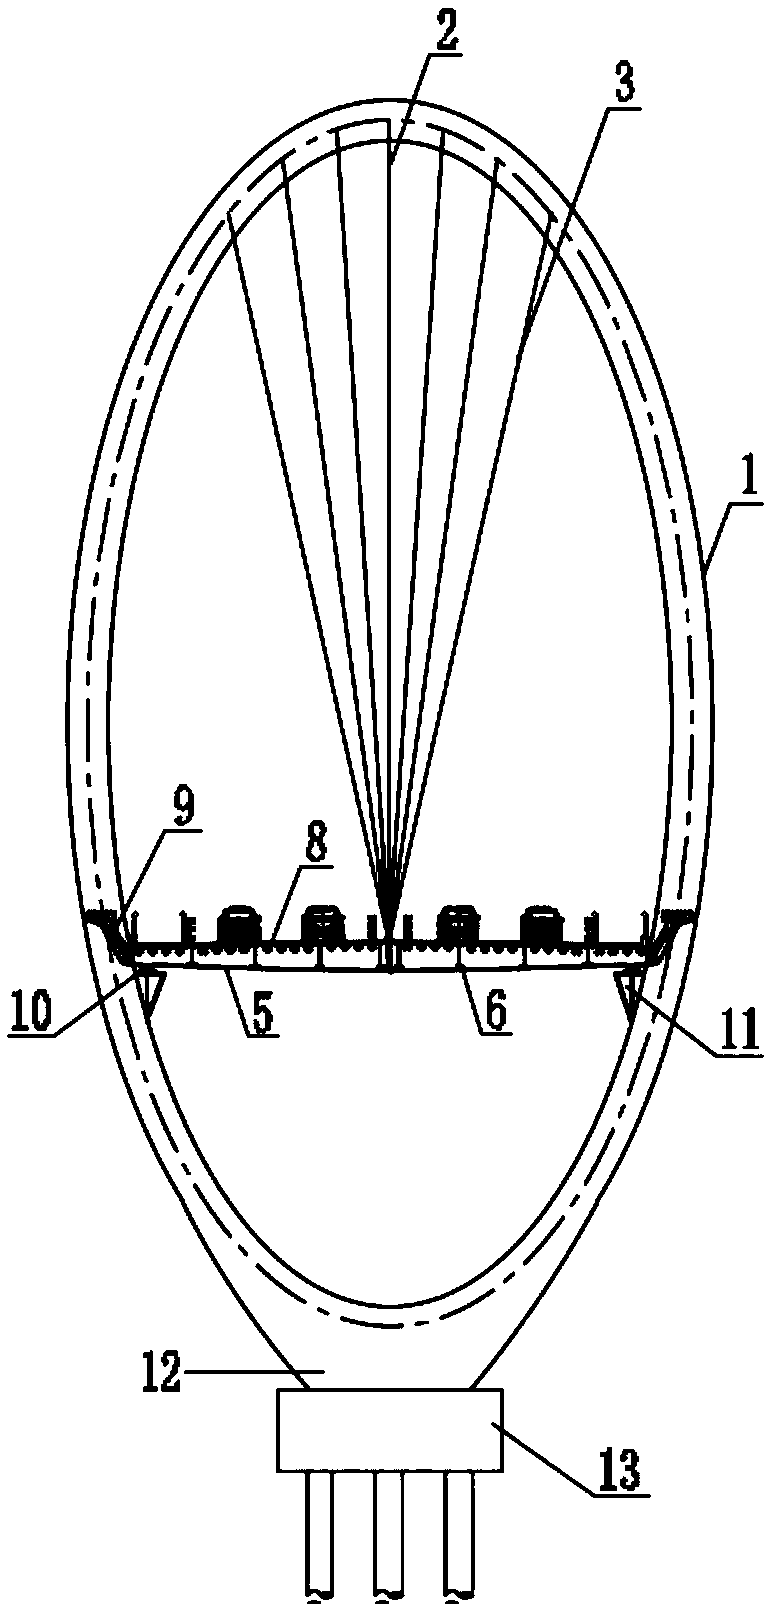 Single spiral arch and a suspension cable composite bridge structure system